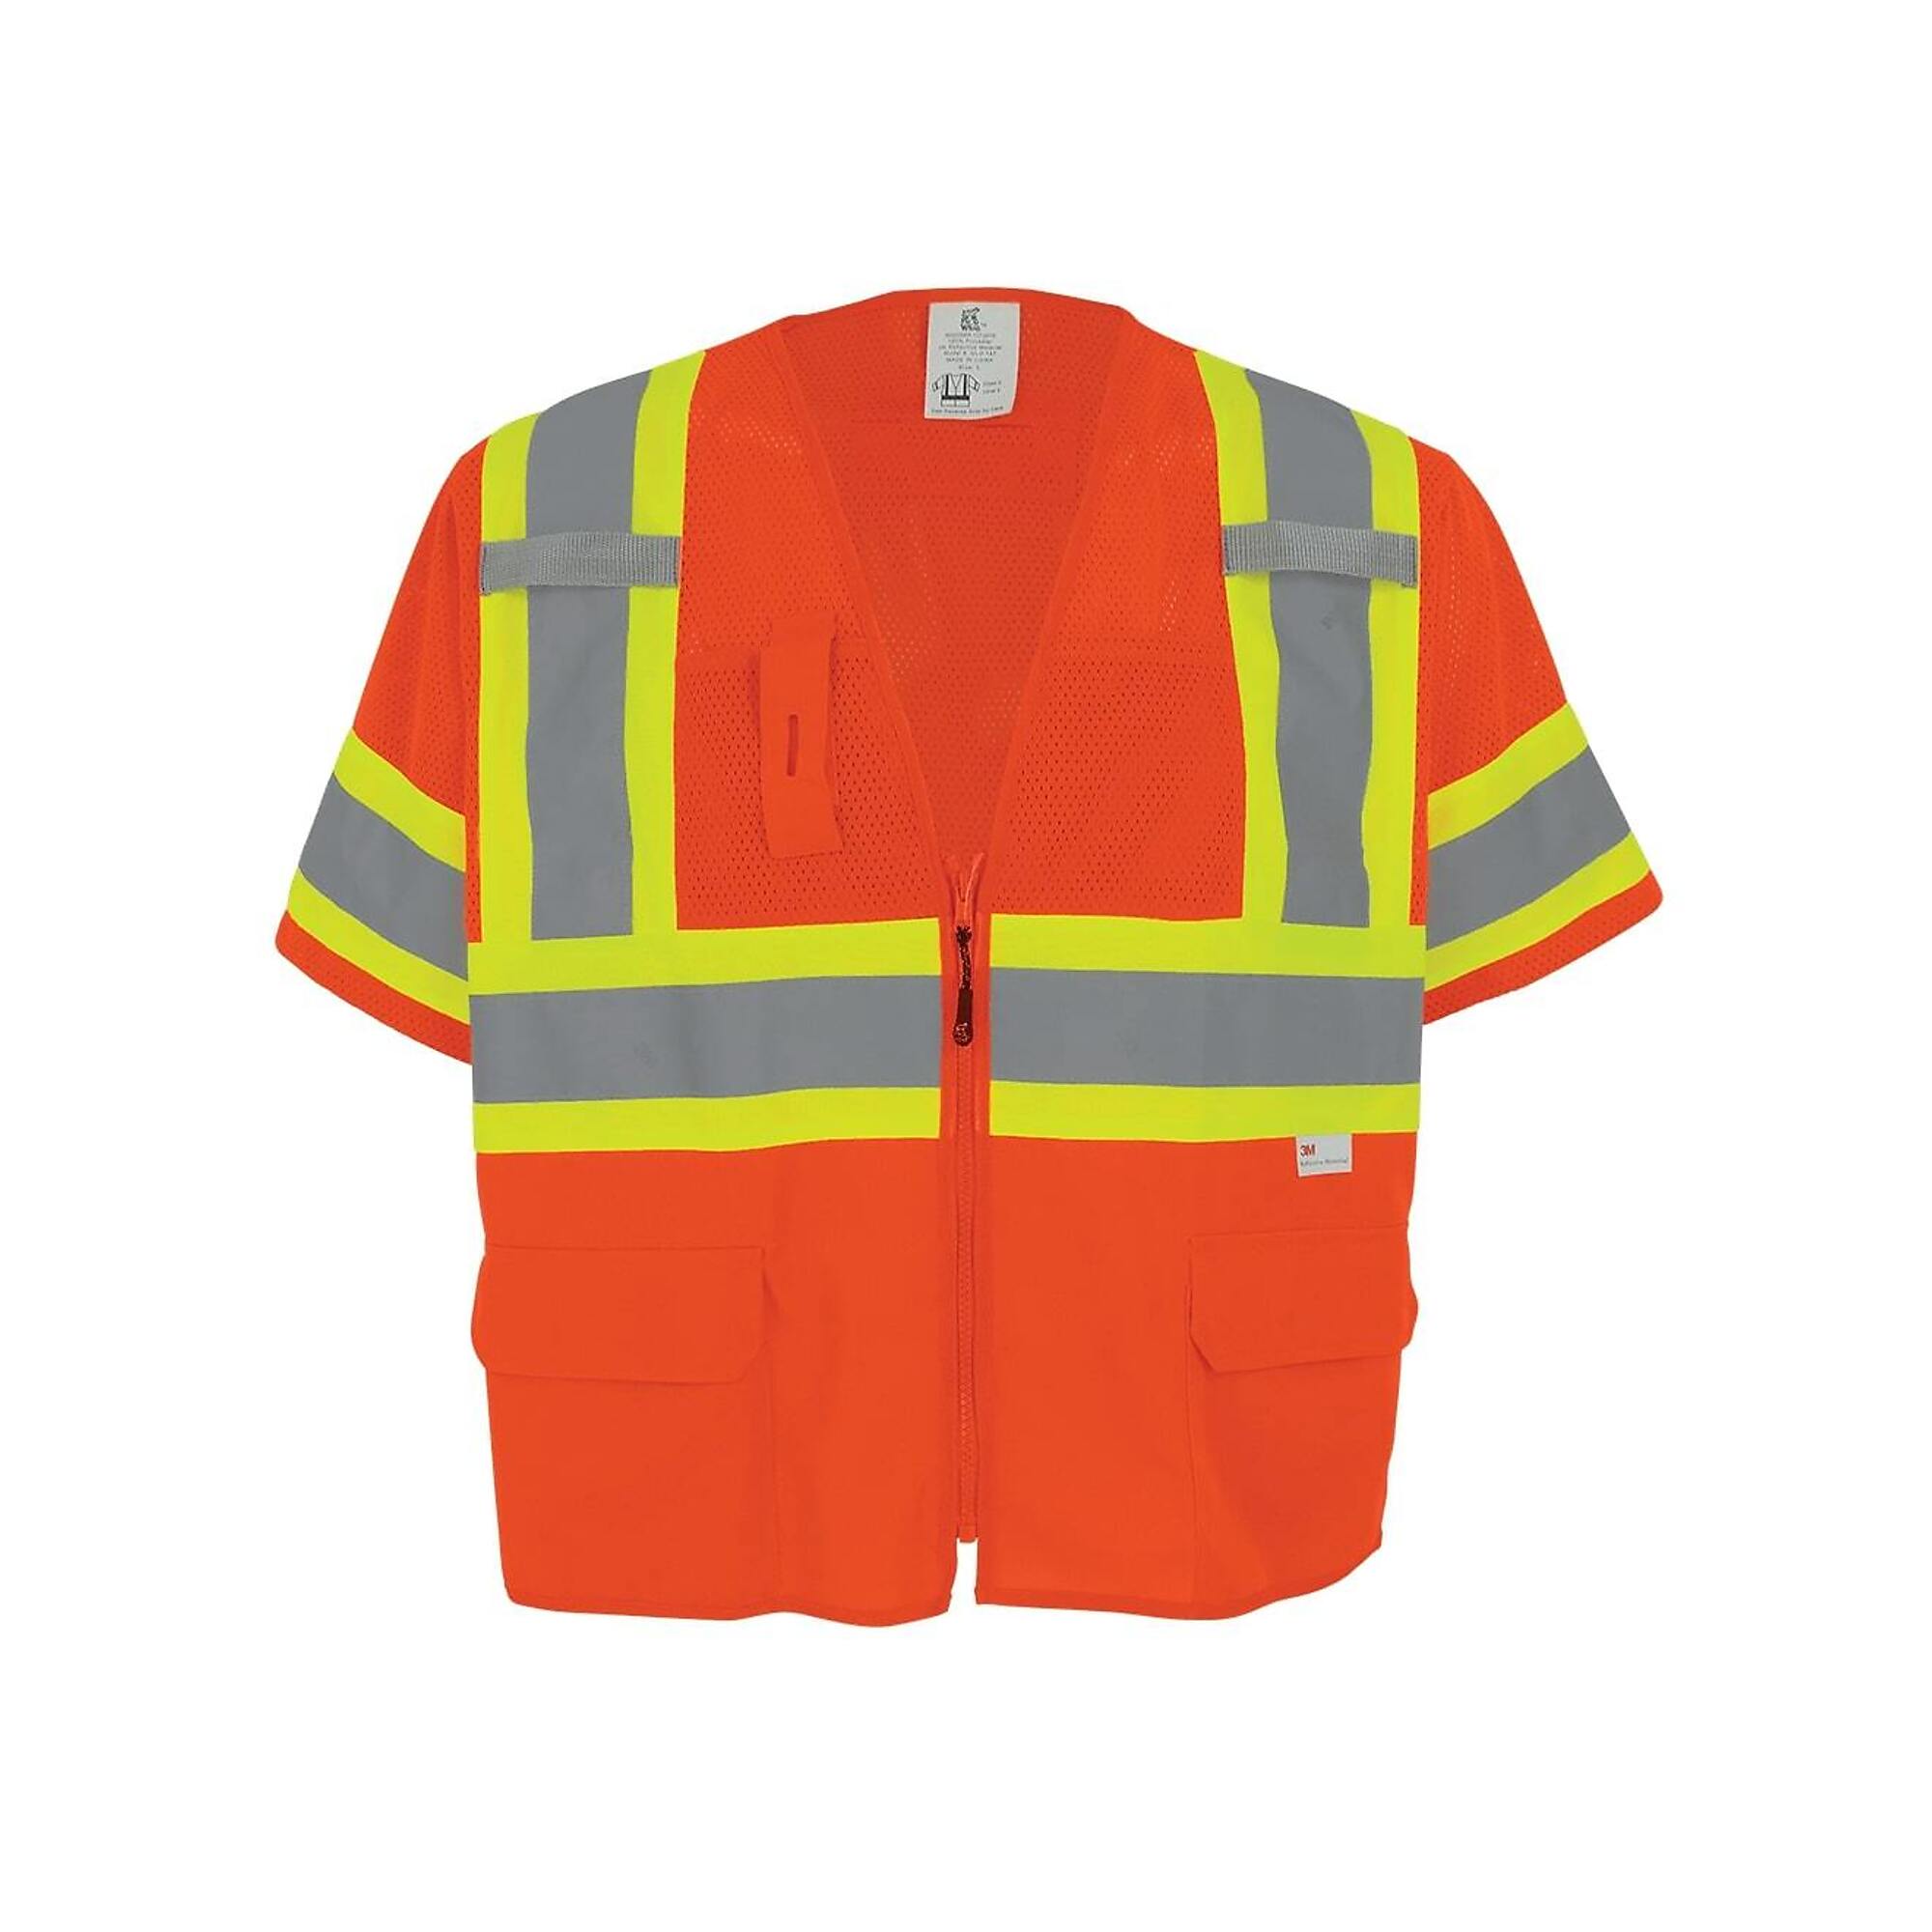 FrogWear, HV Orange, Class 3 6 Pockets, With Sleeves Solid/Mesh Vest, Size 5XL, Color High-Visibility Orange, Model GLO-147-5XL